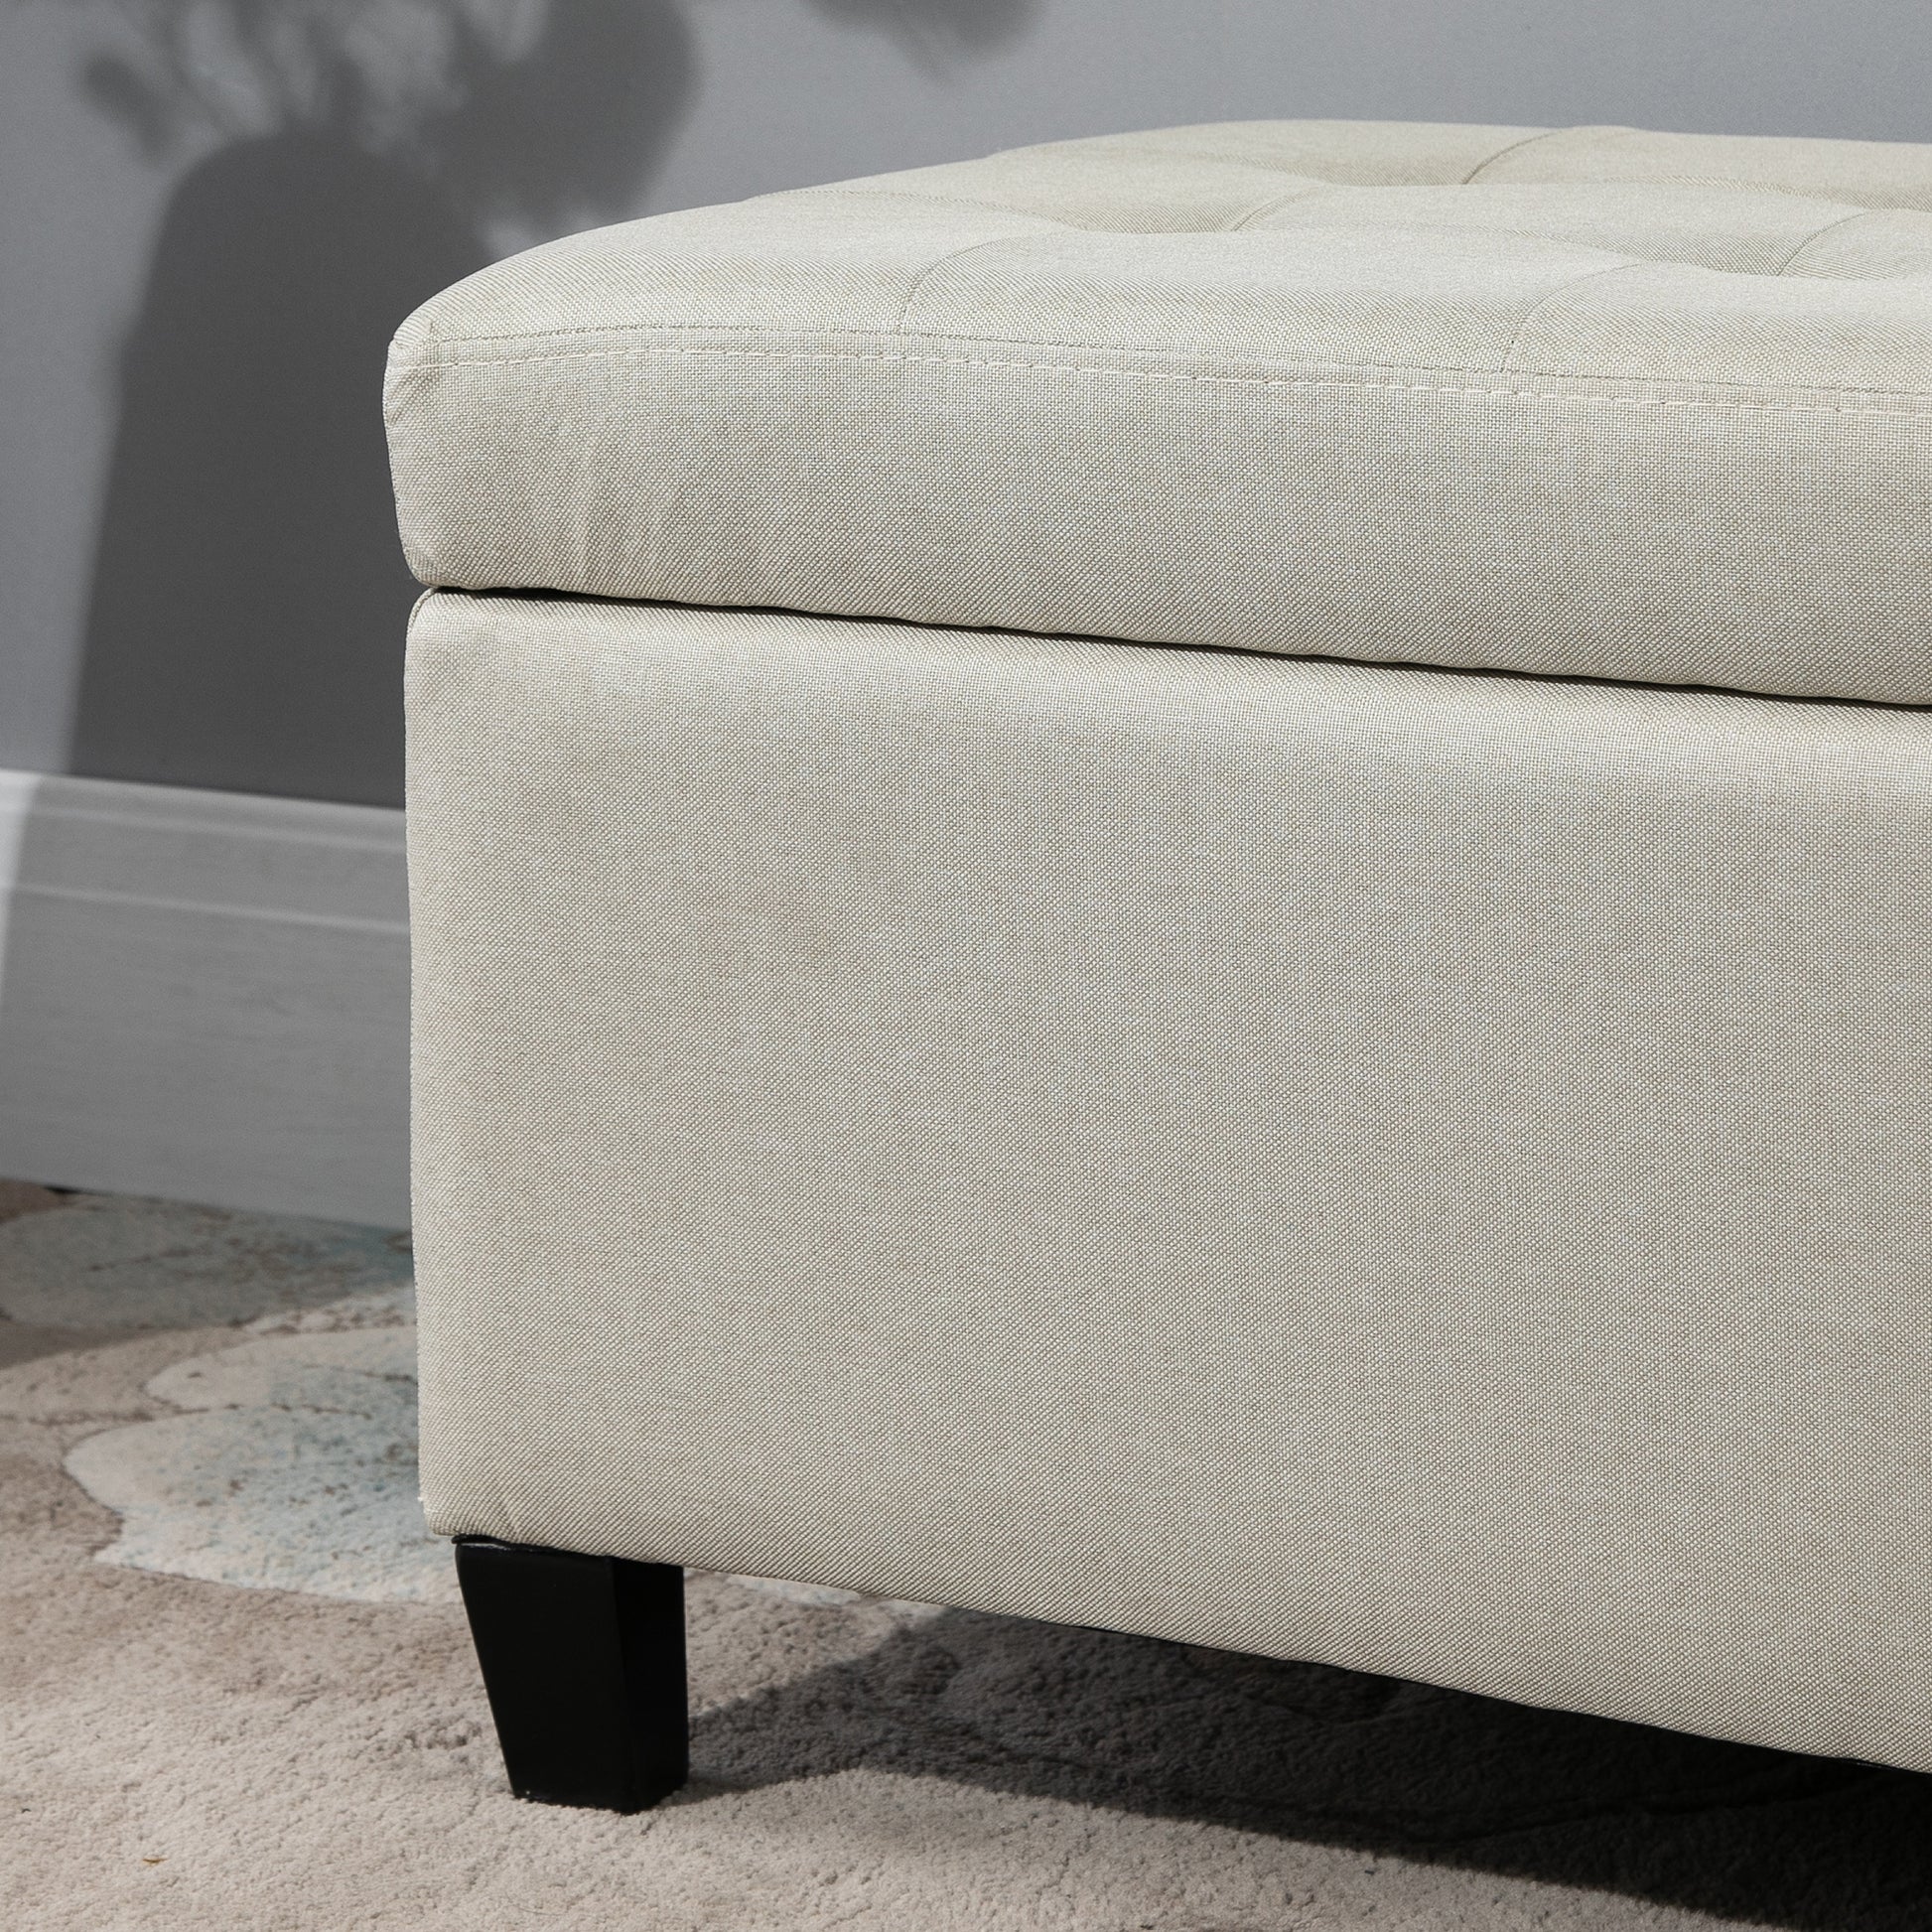 Large 50" Rectangular Storage Ottoman Bench, Tufted Upholstered Linen Fabric Wood Feet Entry Bench, Contemporary Home Decor Beige at Gallery Canada